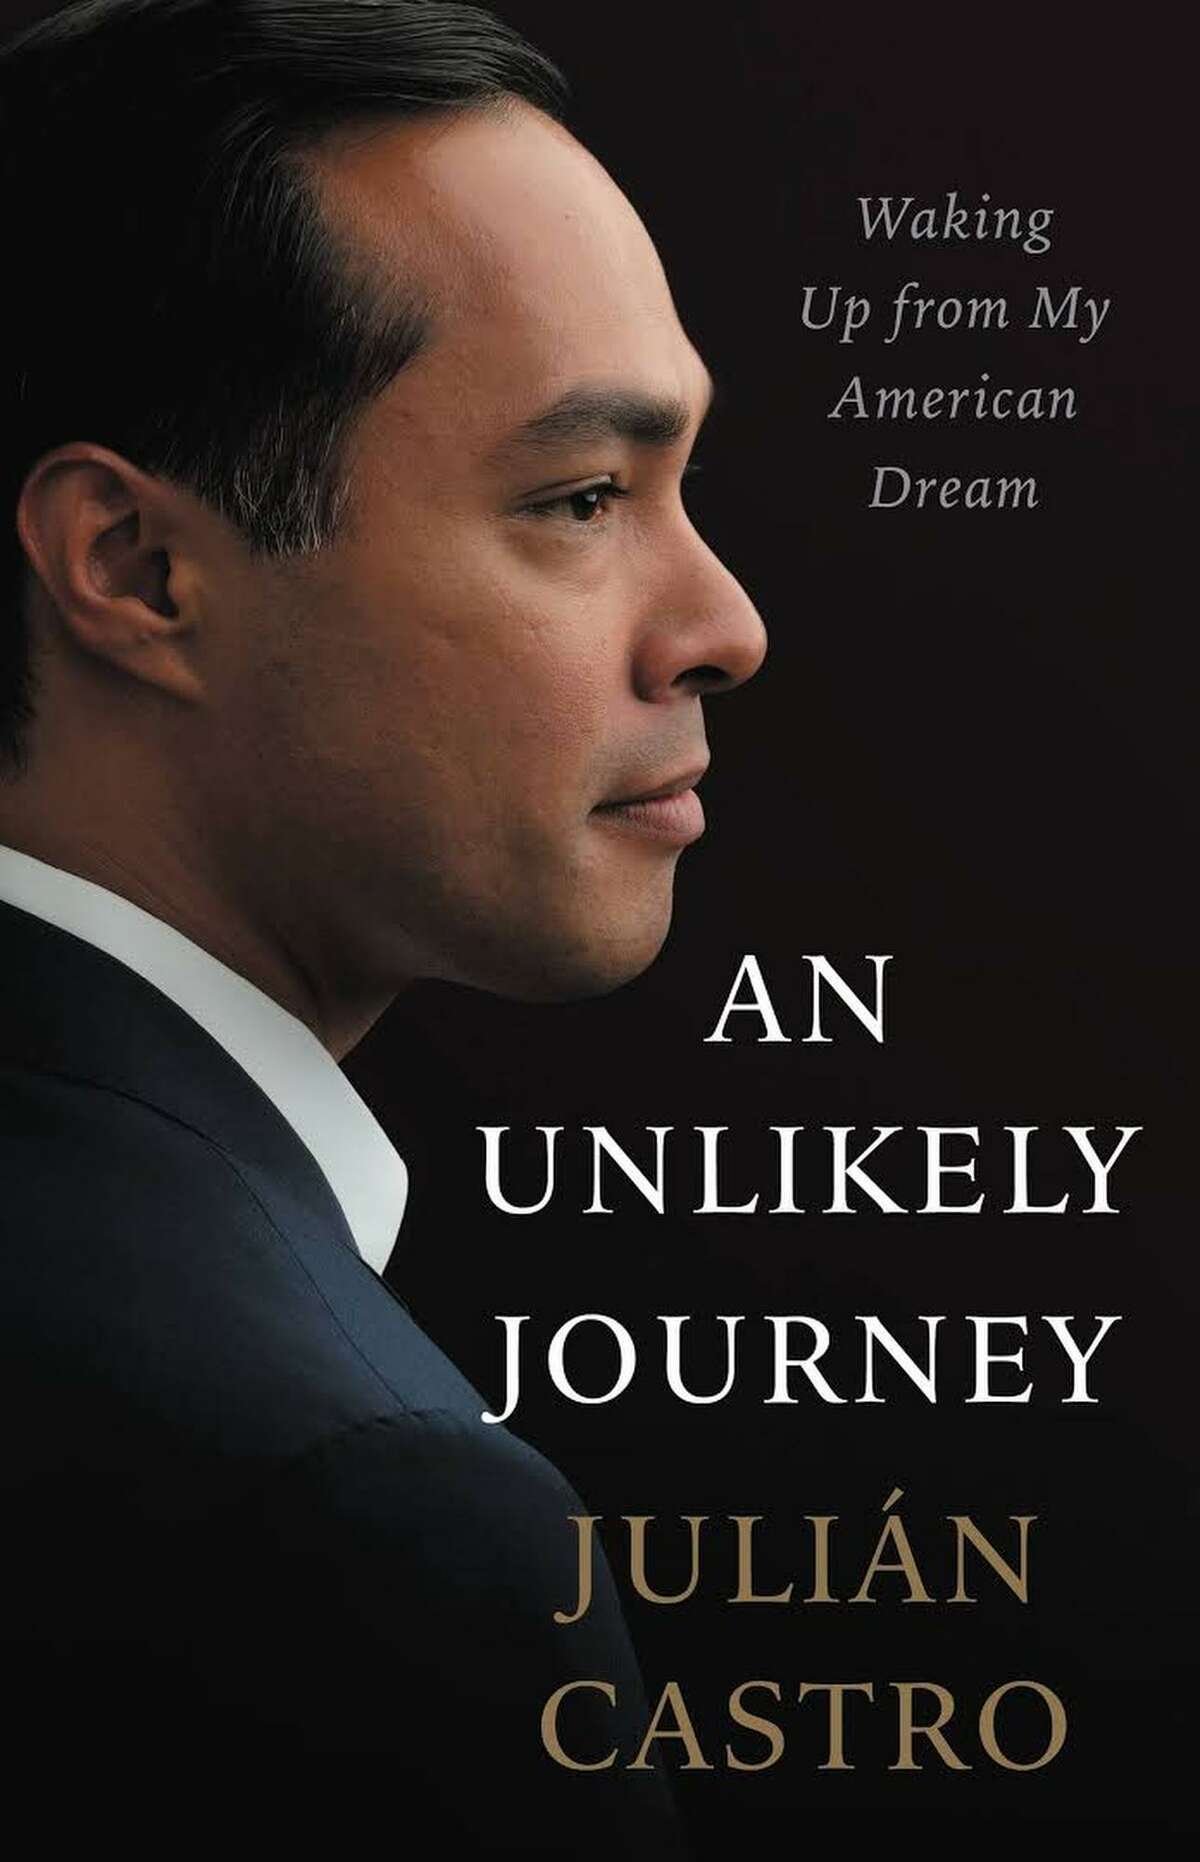 The cover of Julian Castro's book, "An Unlikely Journey" is seen in a courtesy image provided by publisher Little Brown.